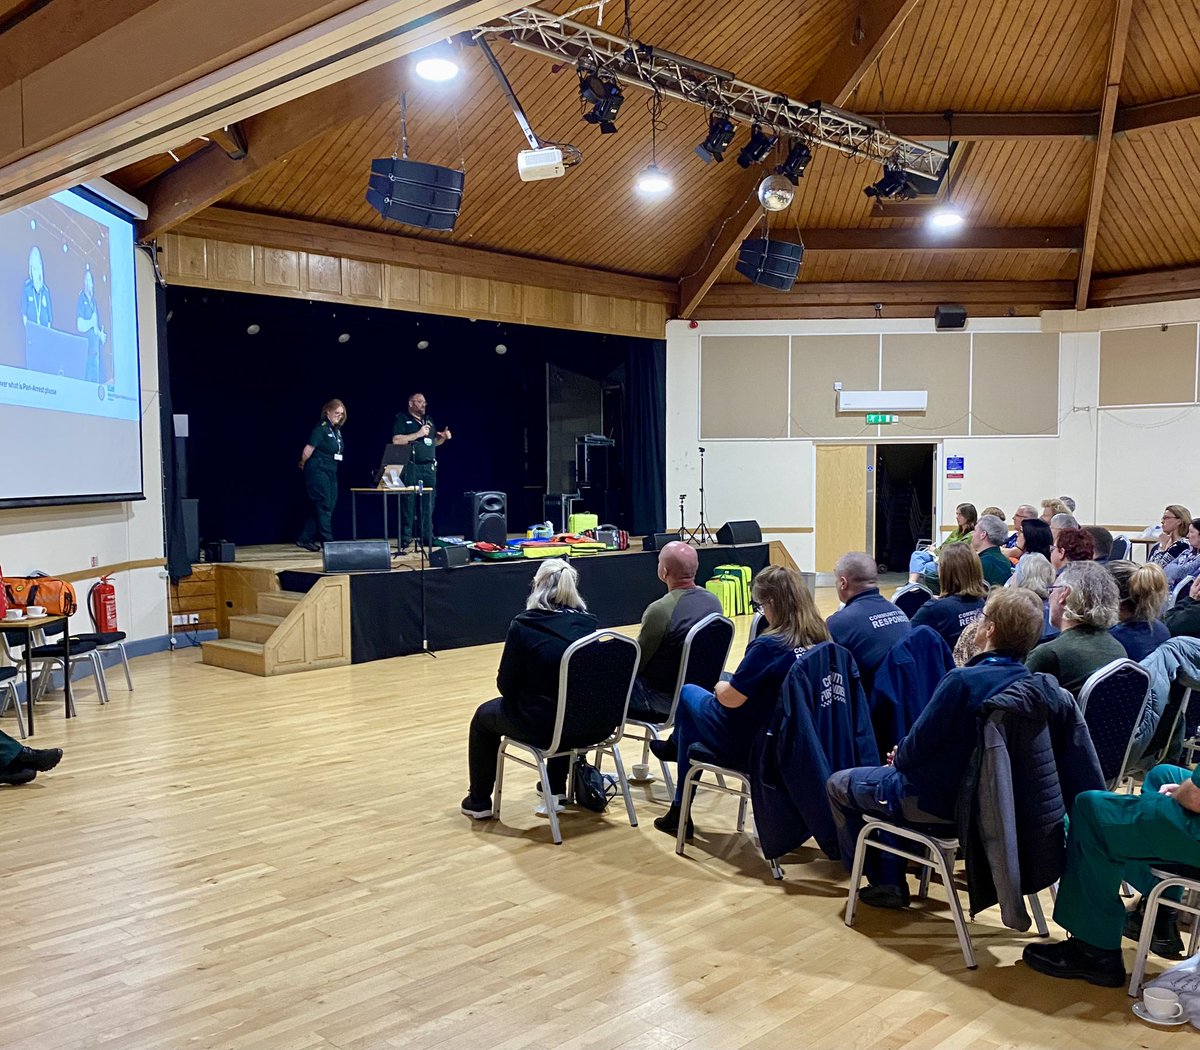 Ended the day in Debenham for our CFR cardiac arrest event this evening, big thank you to Liz, the whole team @EastEnglandAmb involved and for all our amazing CFRs who took the time out to attend 😀